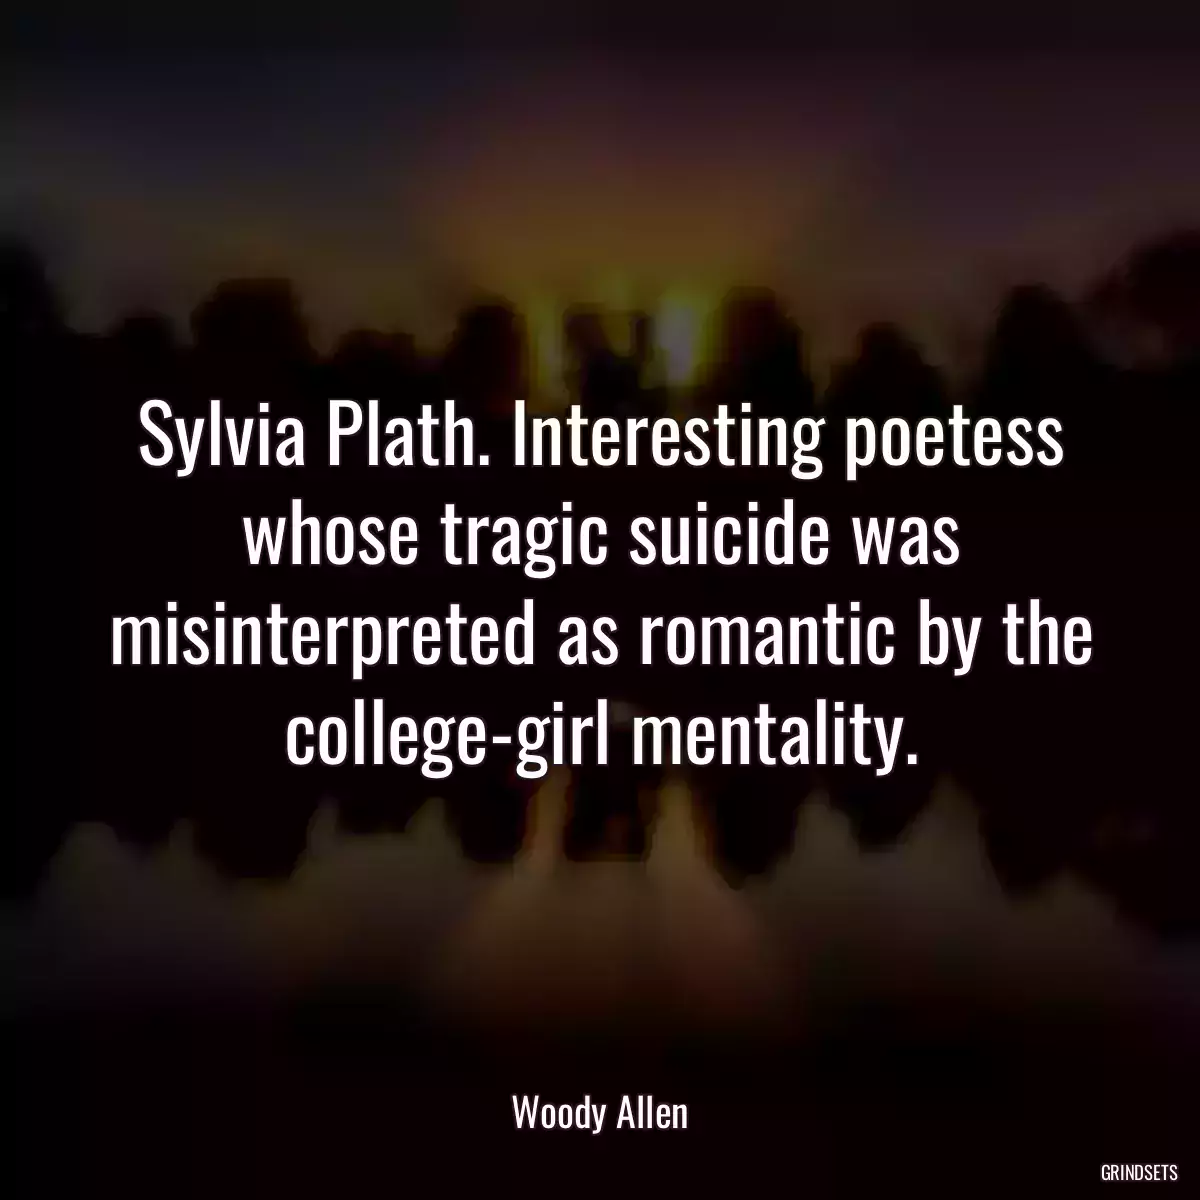 Sylvia Plath. Interesting poetess whose tragic suicide was misinterpreted as romantic by the college-girl mentality.